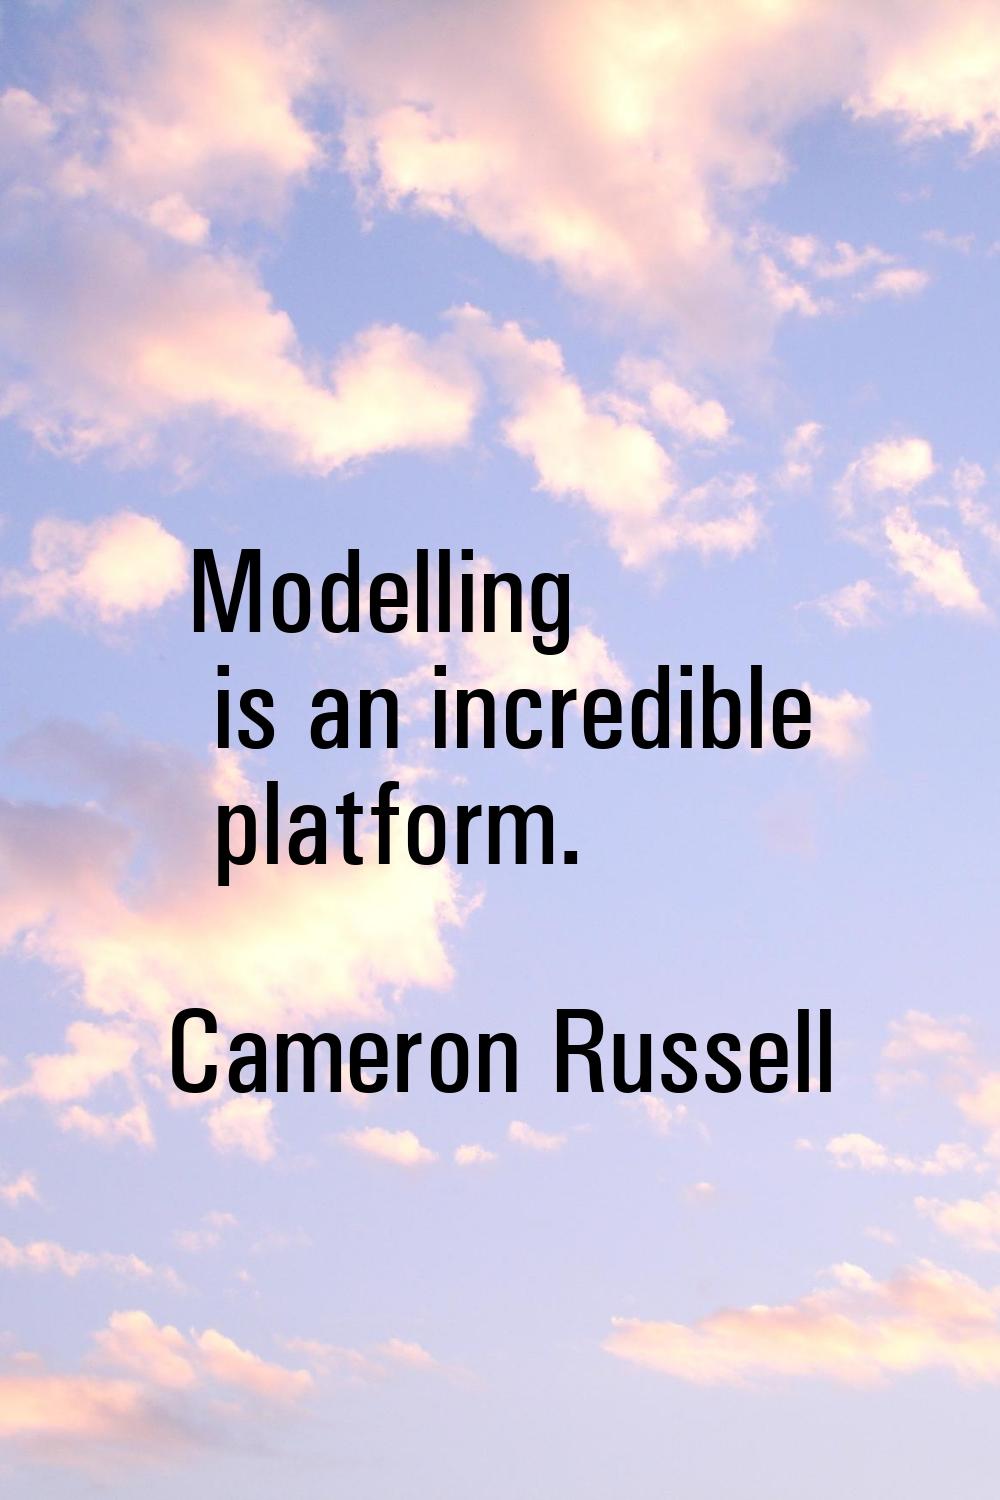 Modelling is an incredible platform.